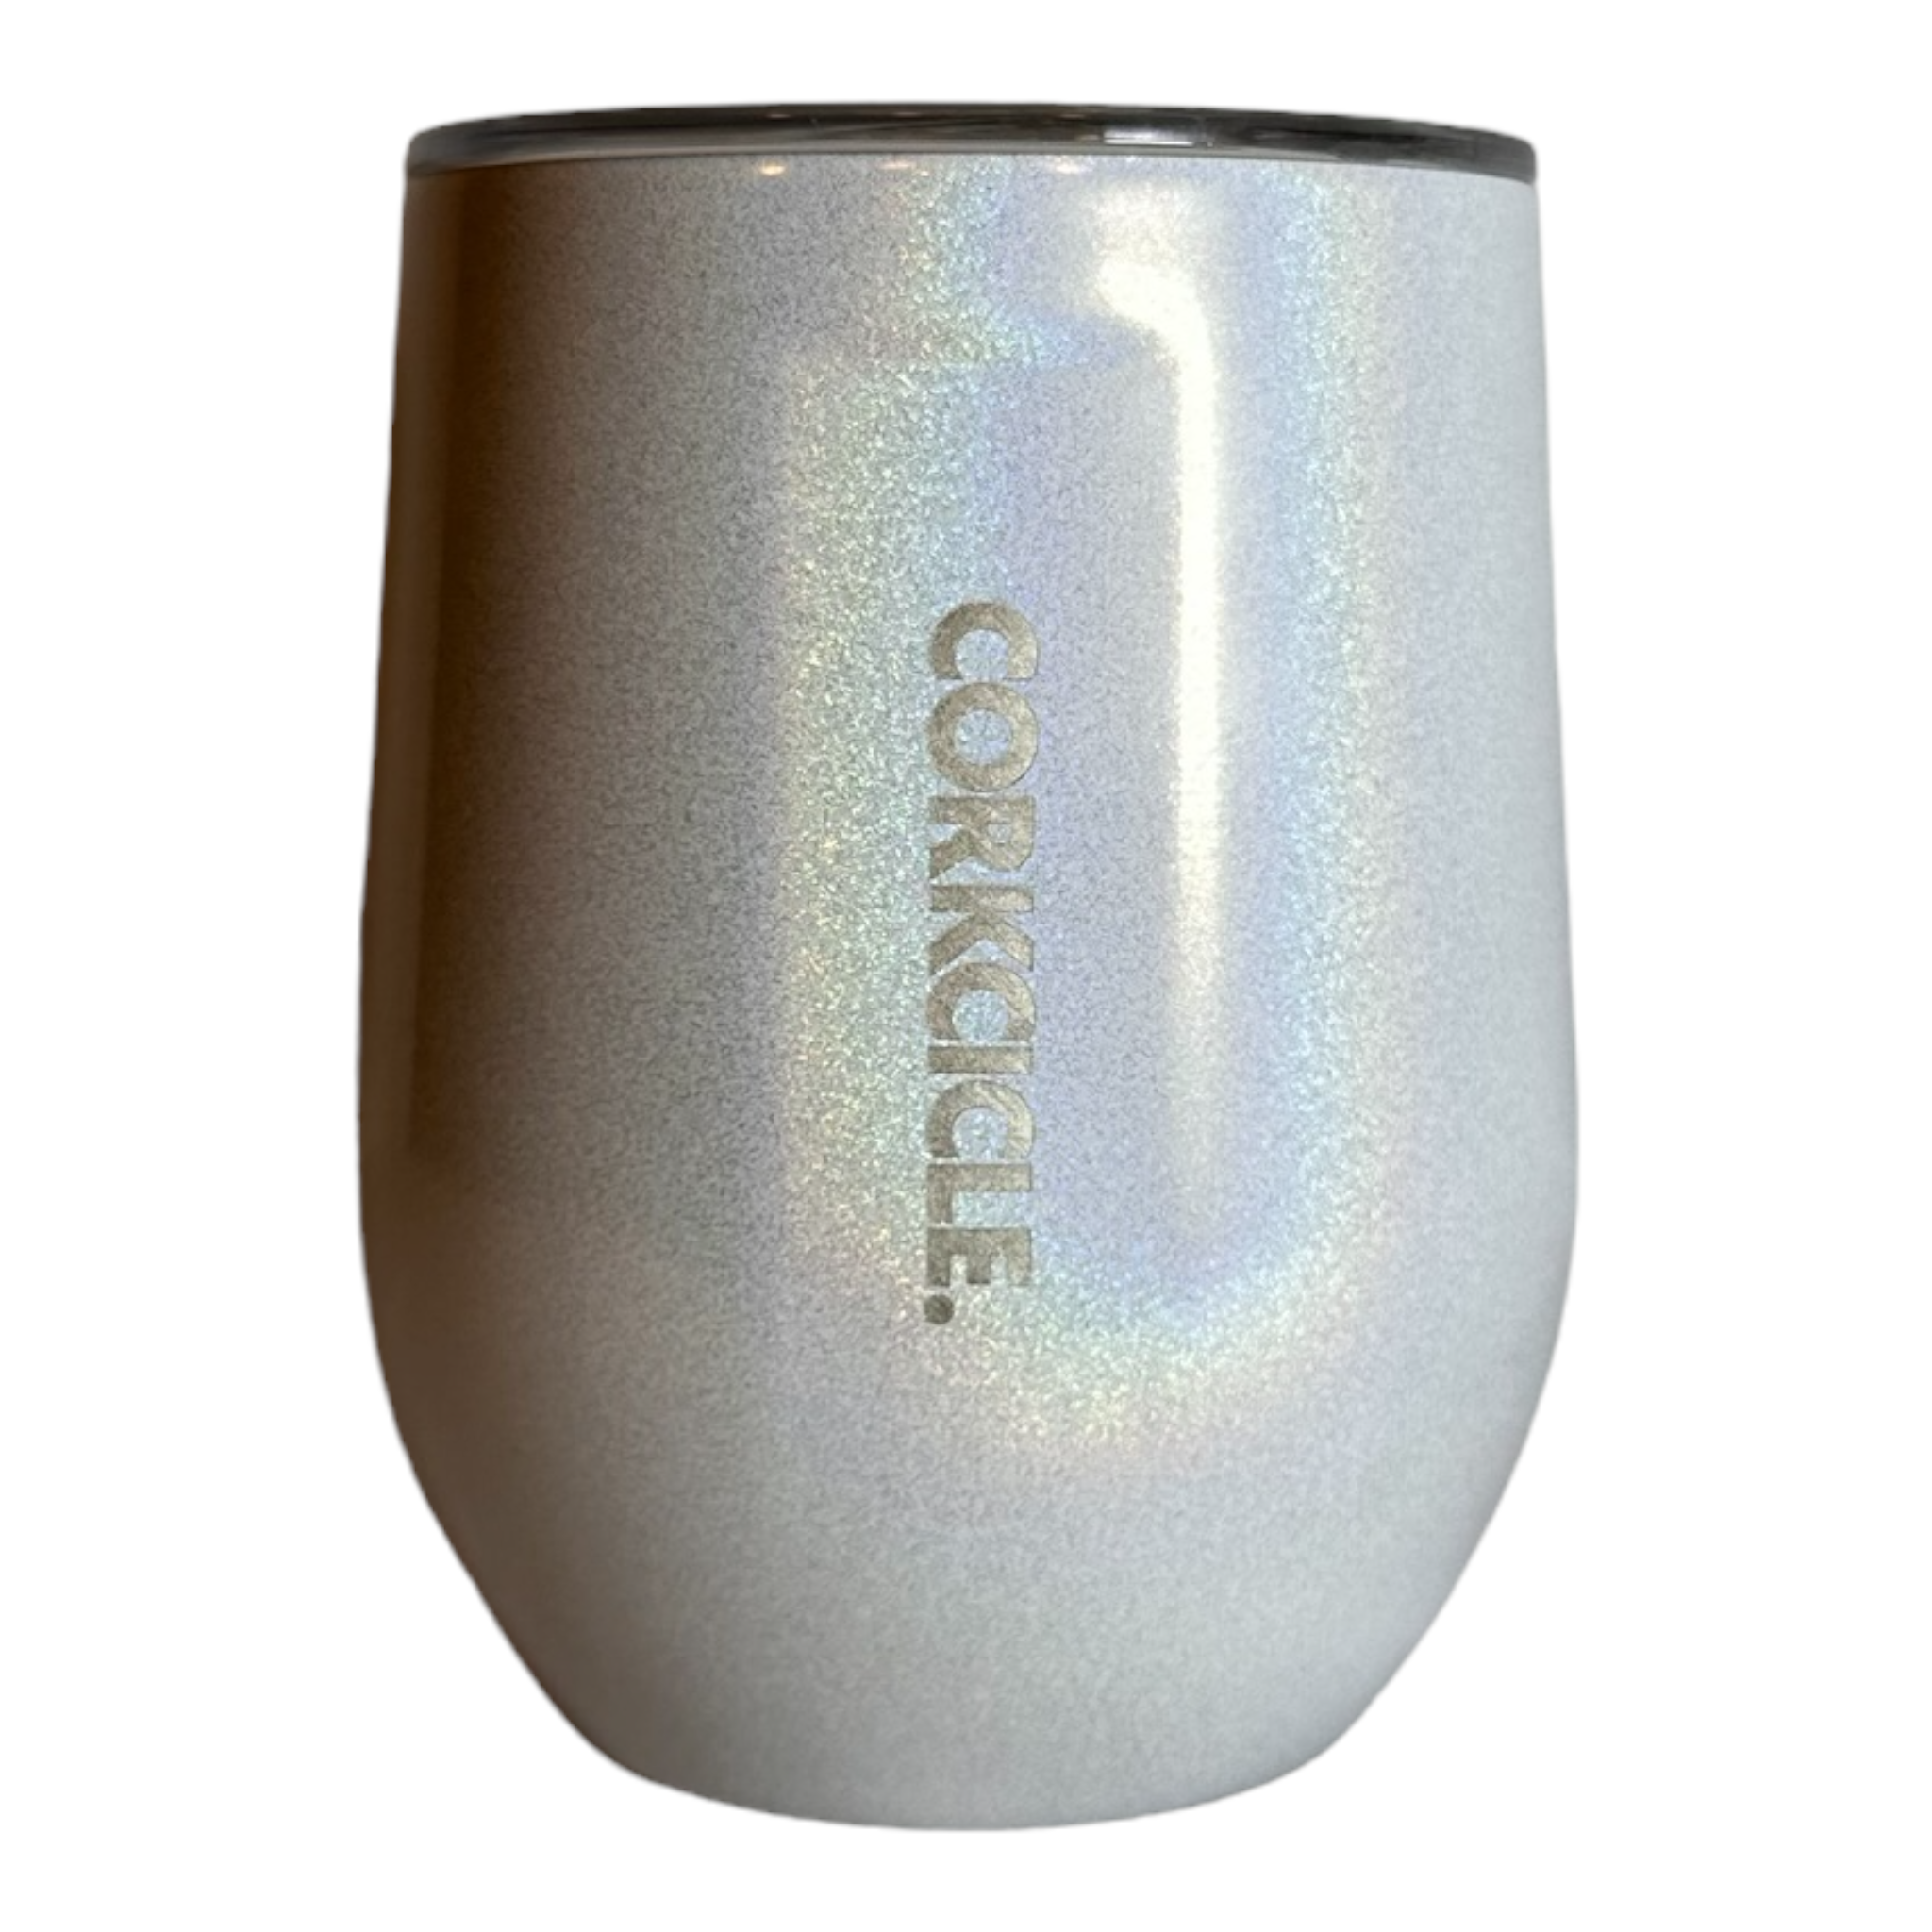 Corkcicle Stemless- 12oz Specialty Unicorn Glampagne - Small Favors